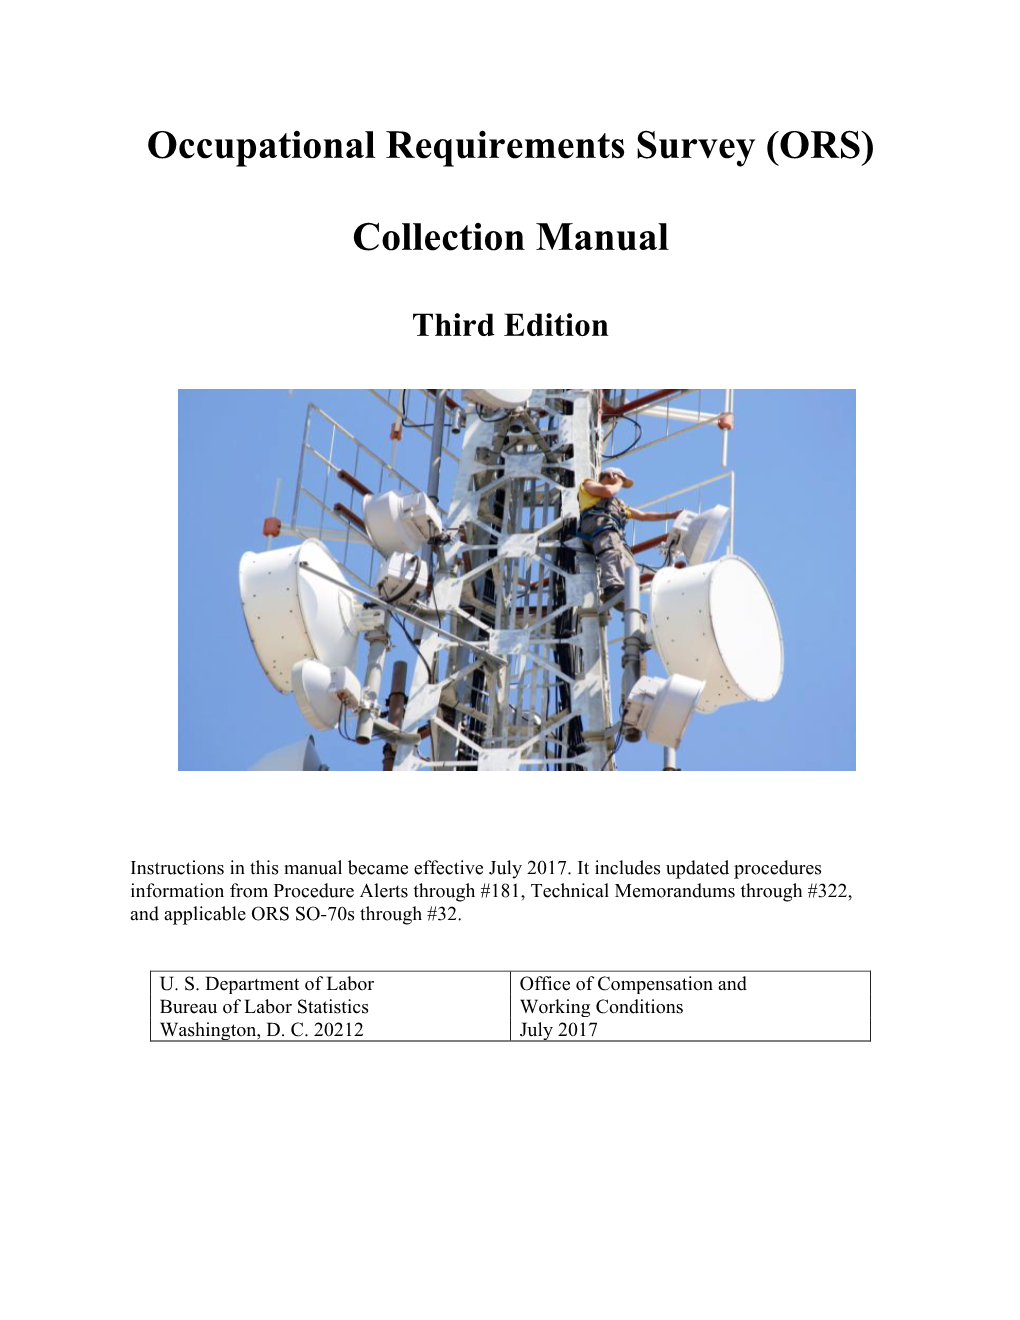 Occupational Requirements Survey (ORS) Collection Manual